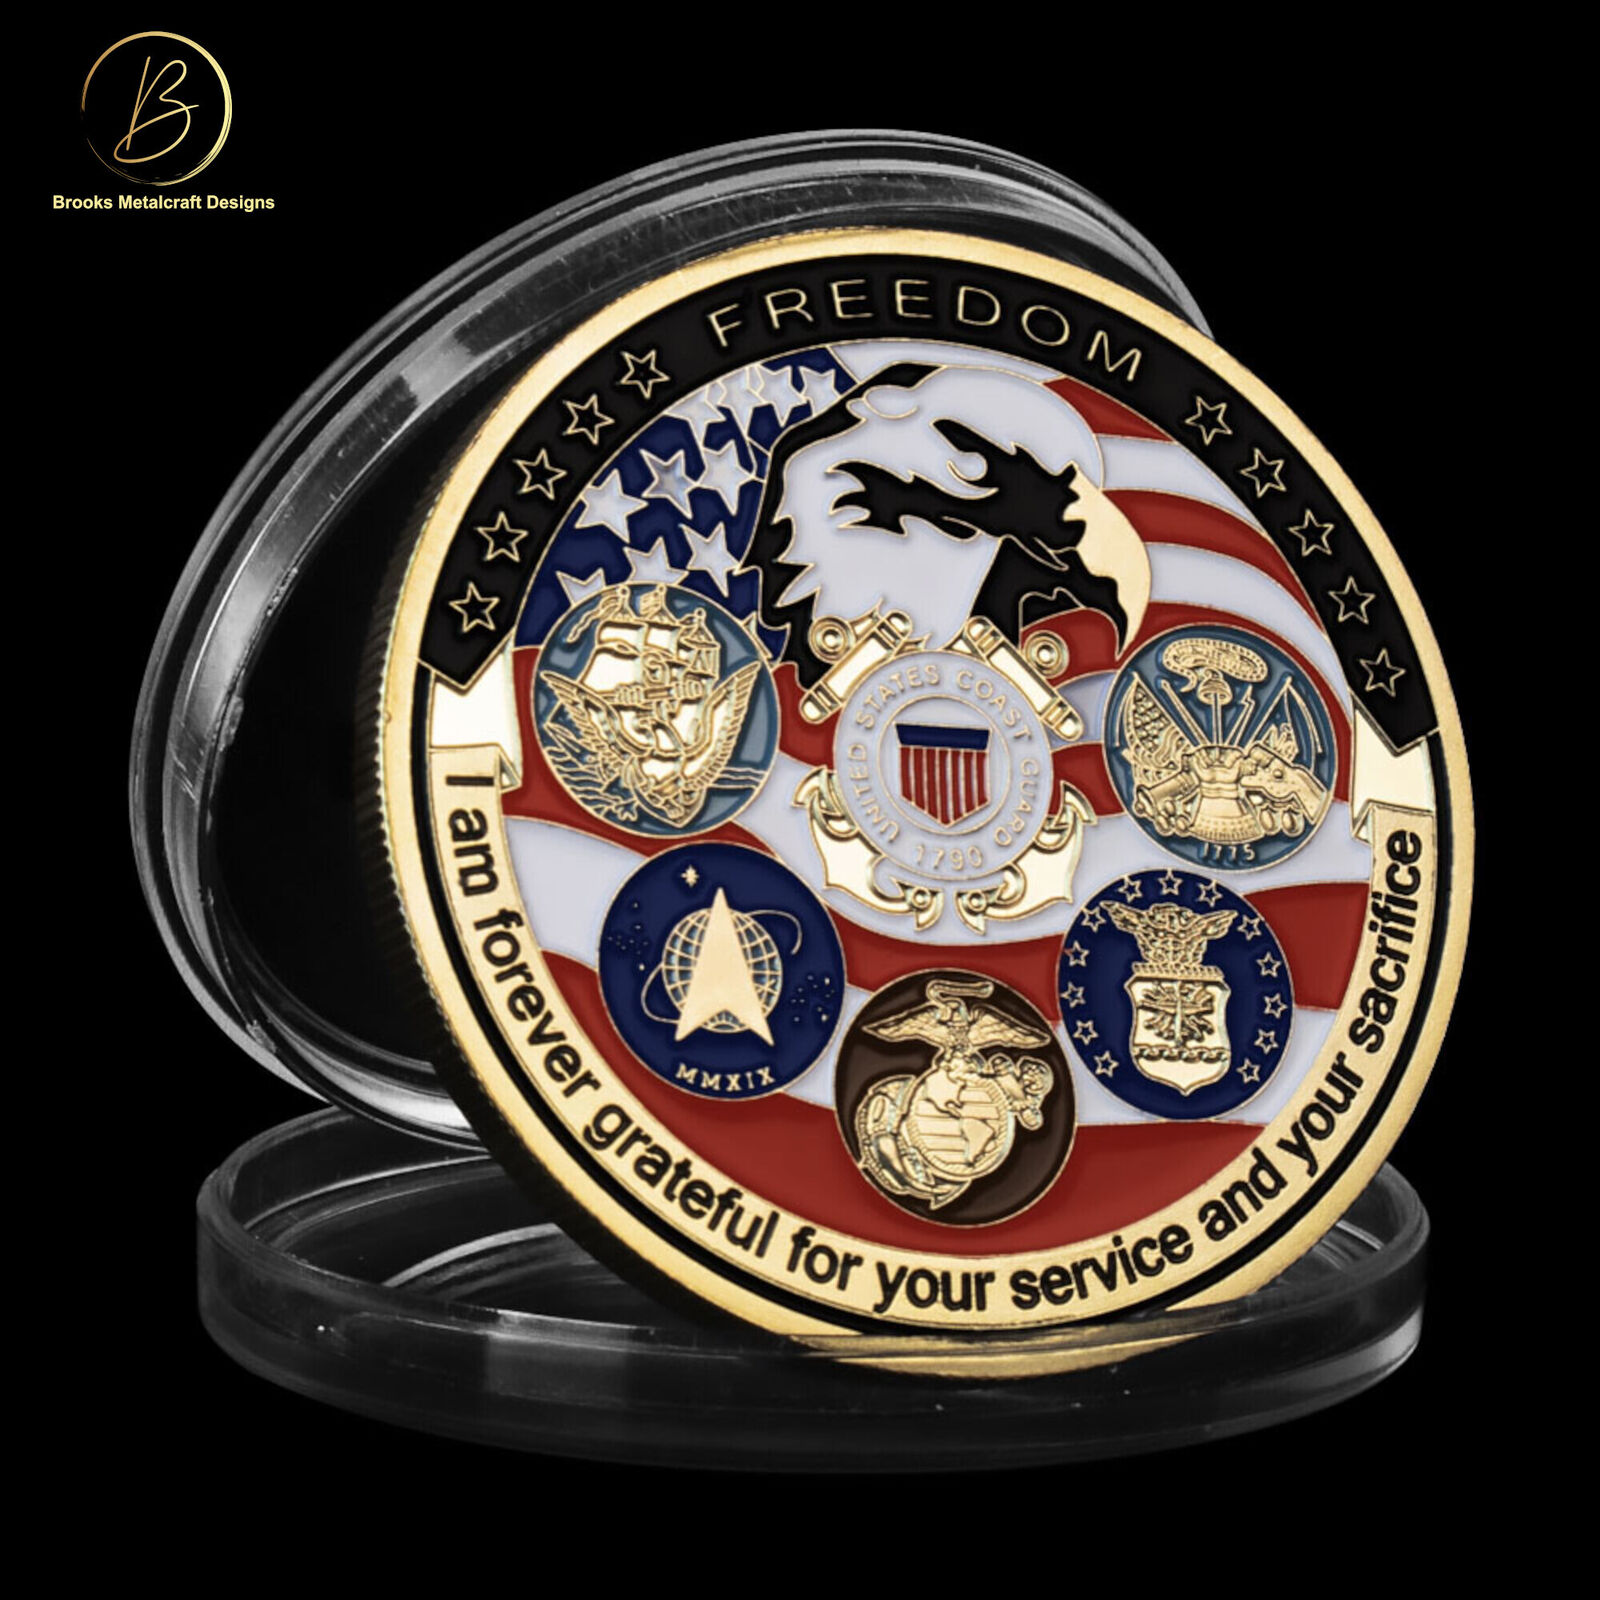 Freedom Eagle featuring all 6-Armed Forces Branches Challenge Coin 1.75 